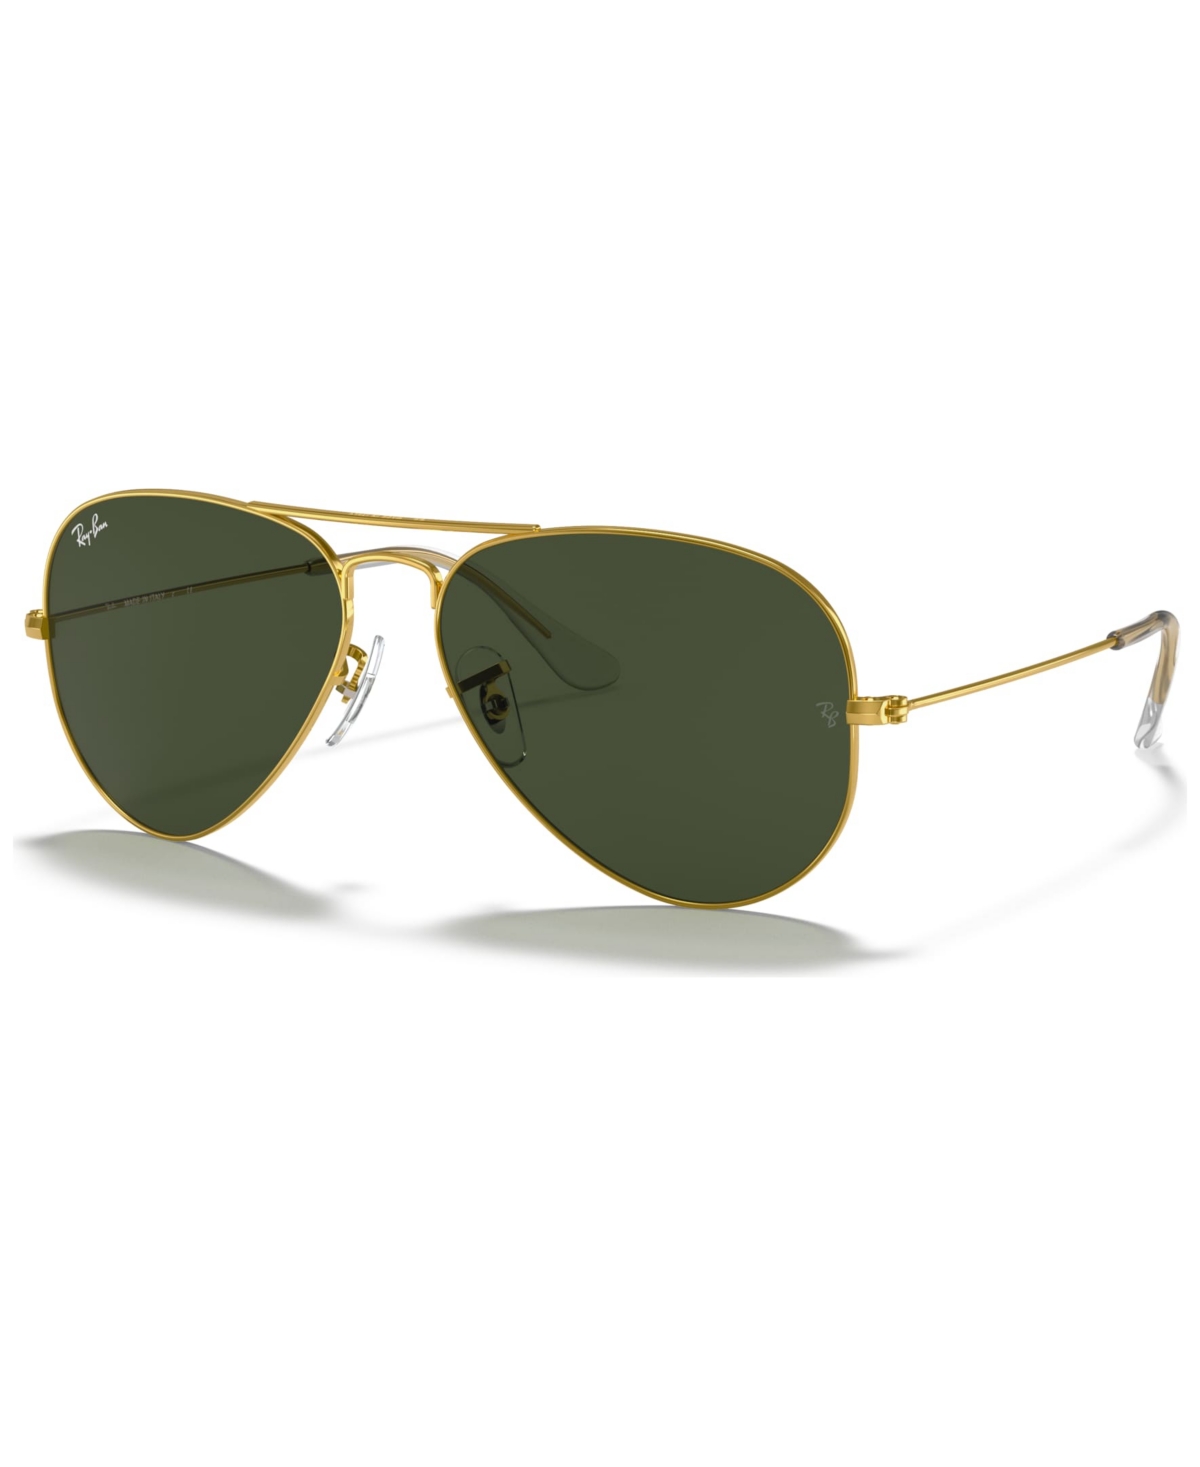 Ray Ban Sunglasses, Rb3025 Aviator Classic In Gold,grey